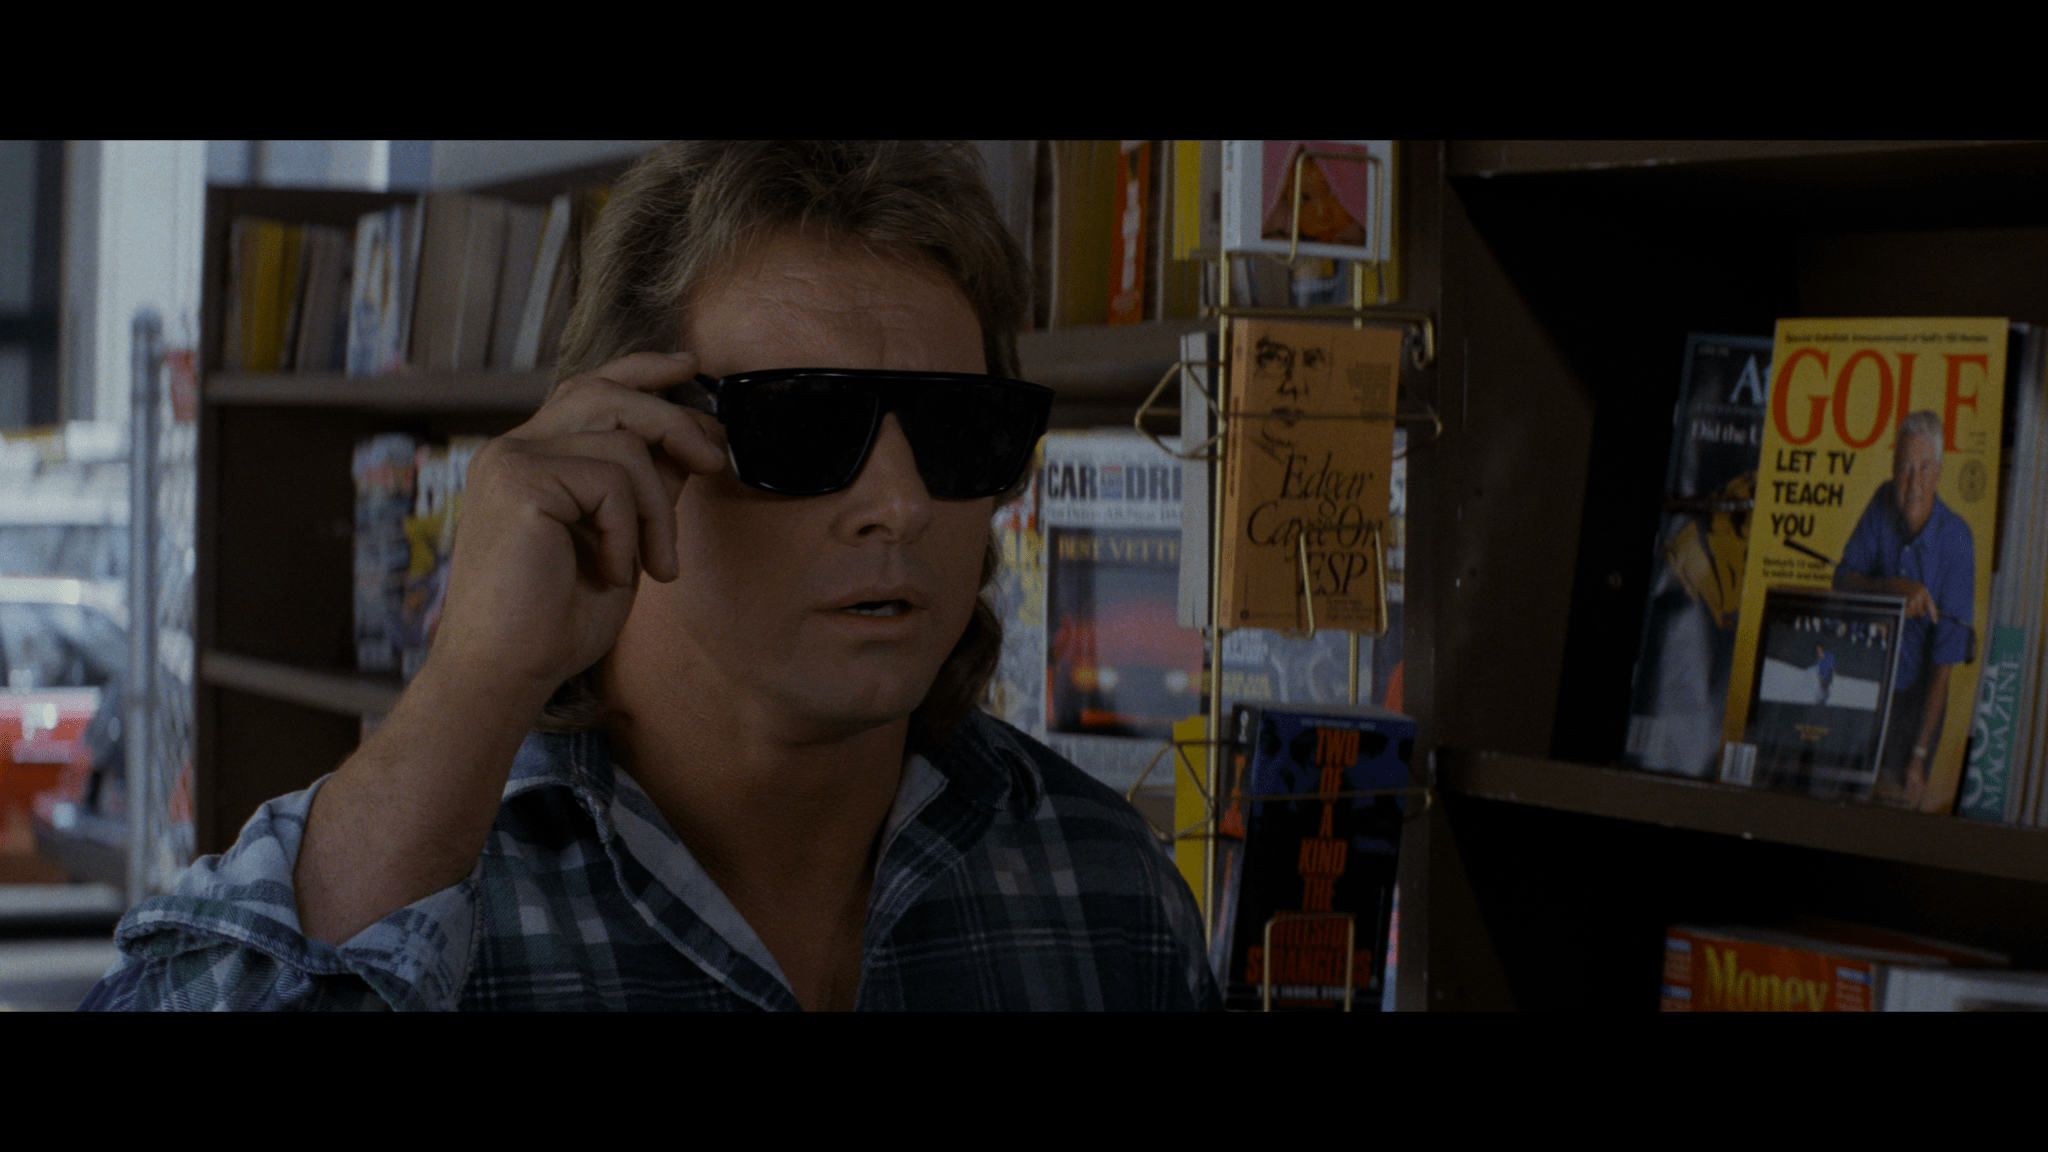 They lives или they live. Чужие среди нас, 1988 Джон Карпентер. Родди Пайпер чужие среди нас.